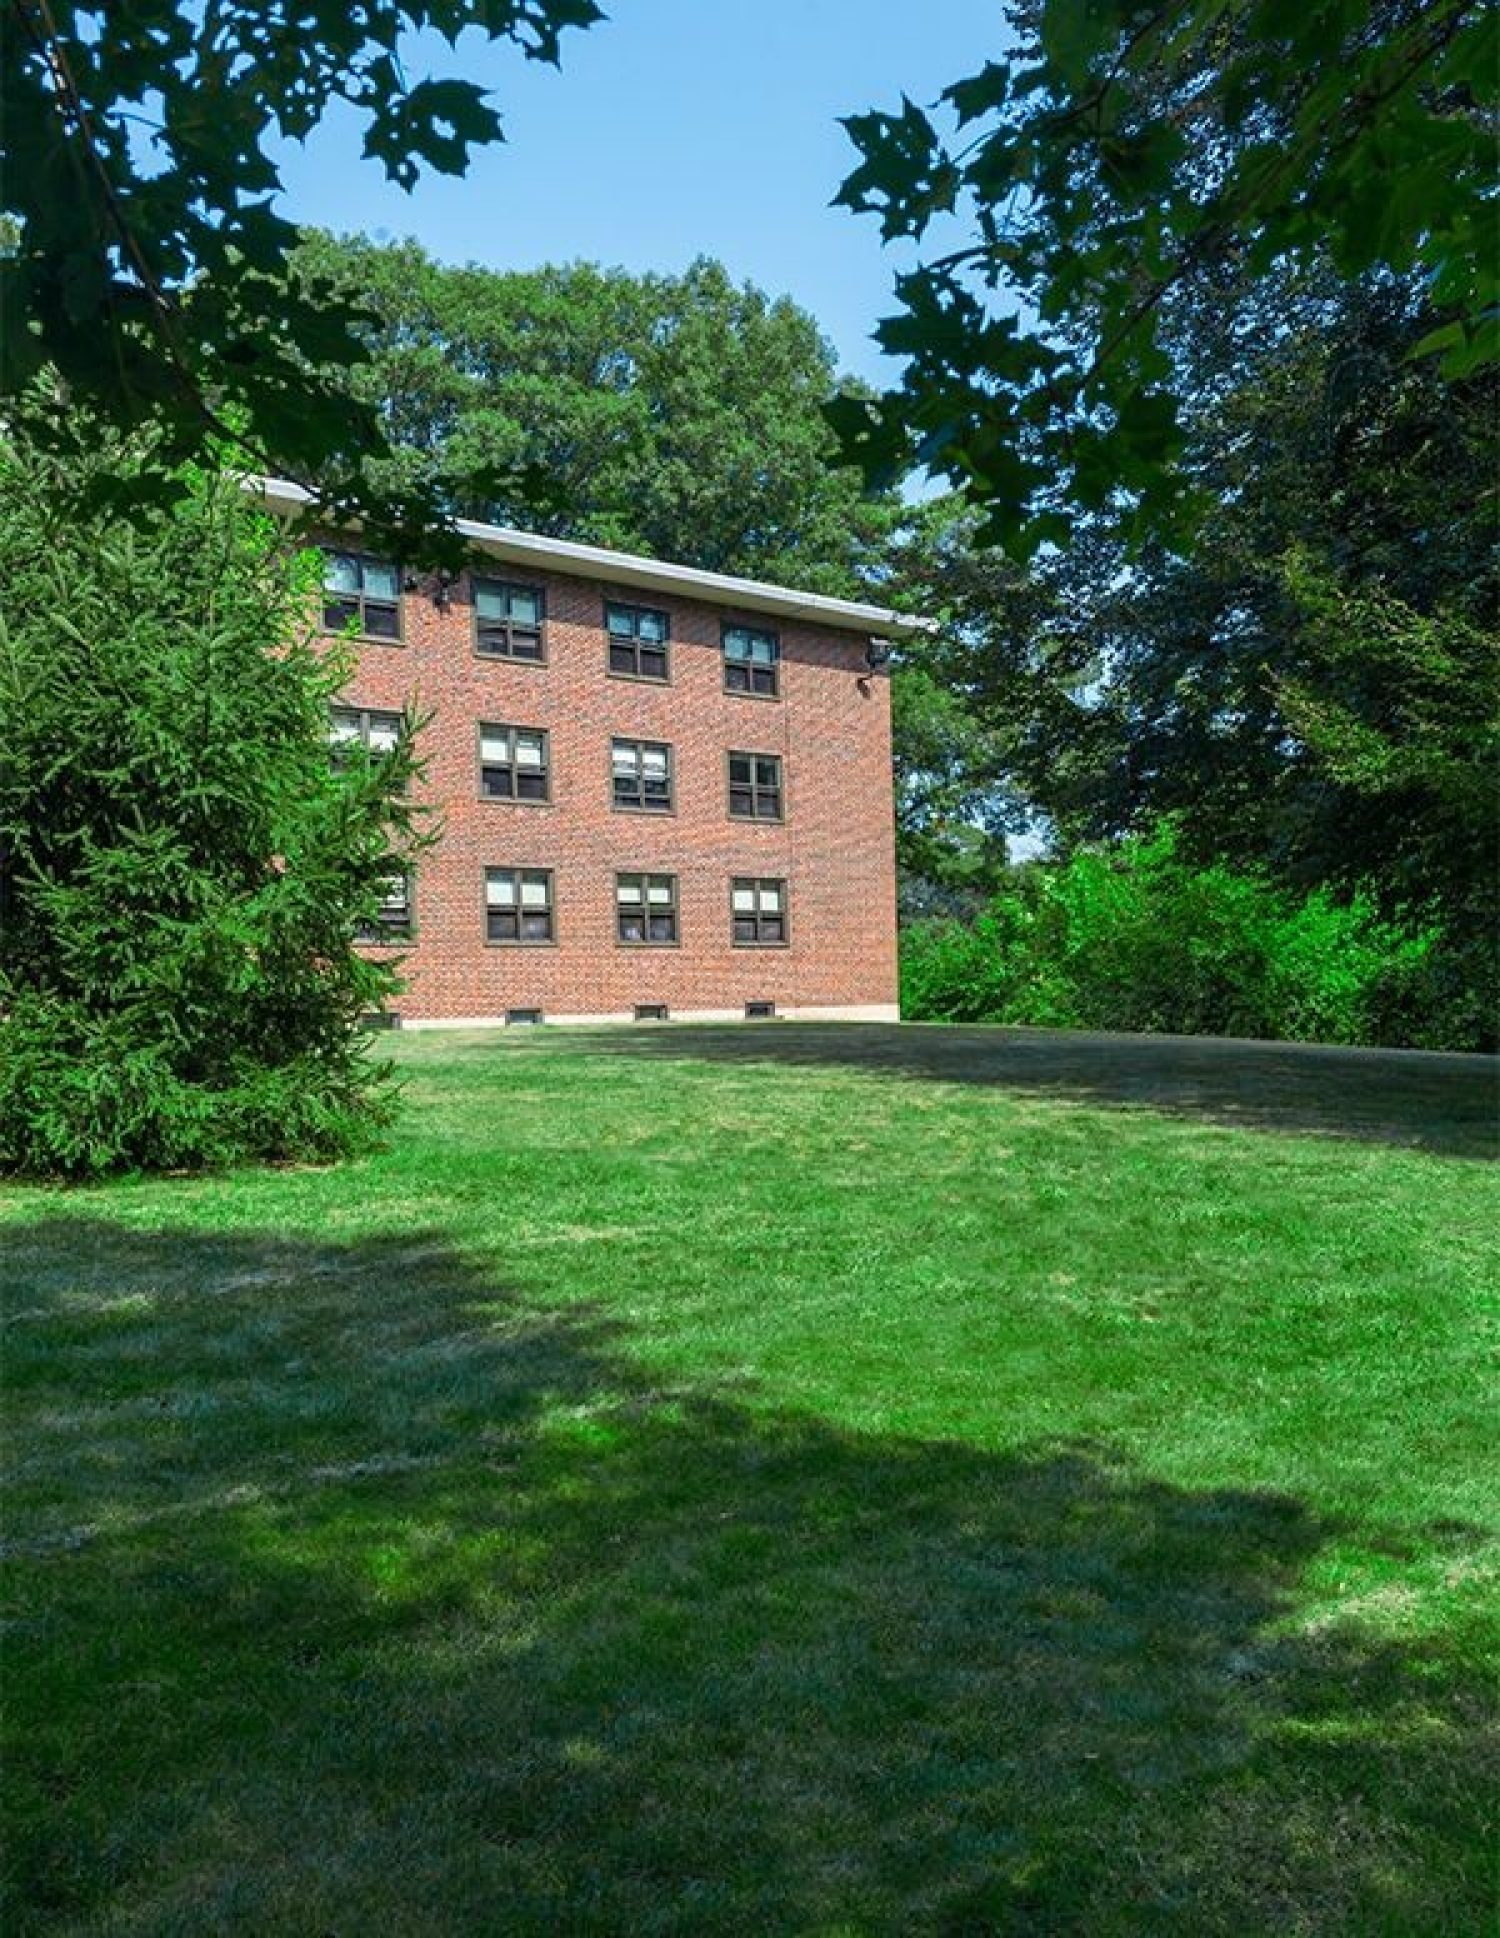 A lawn in front of a brick building